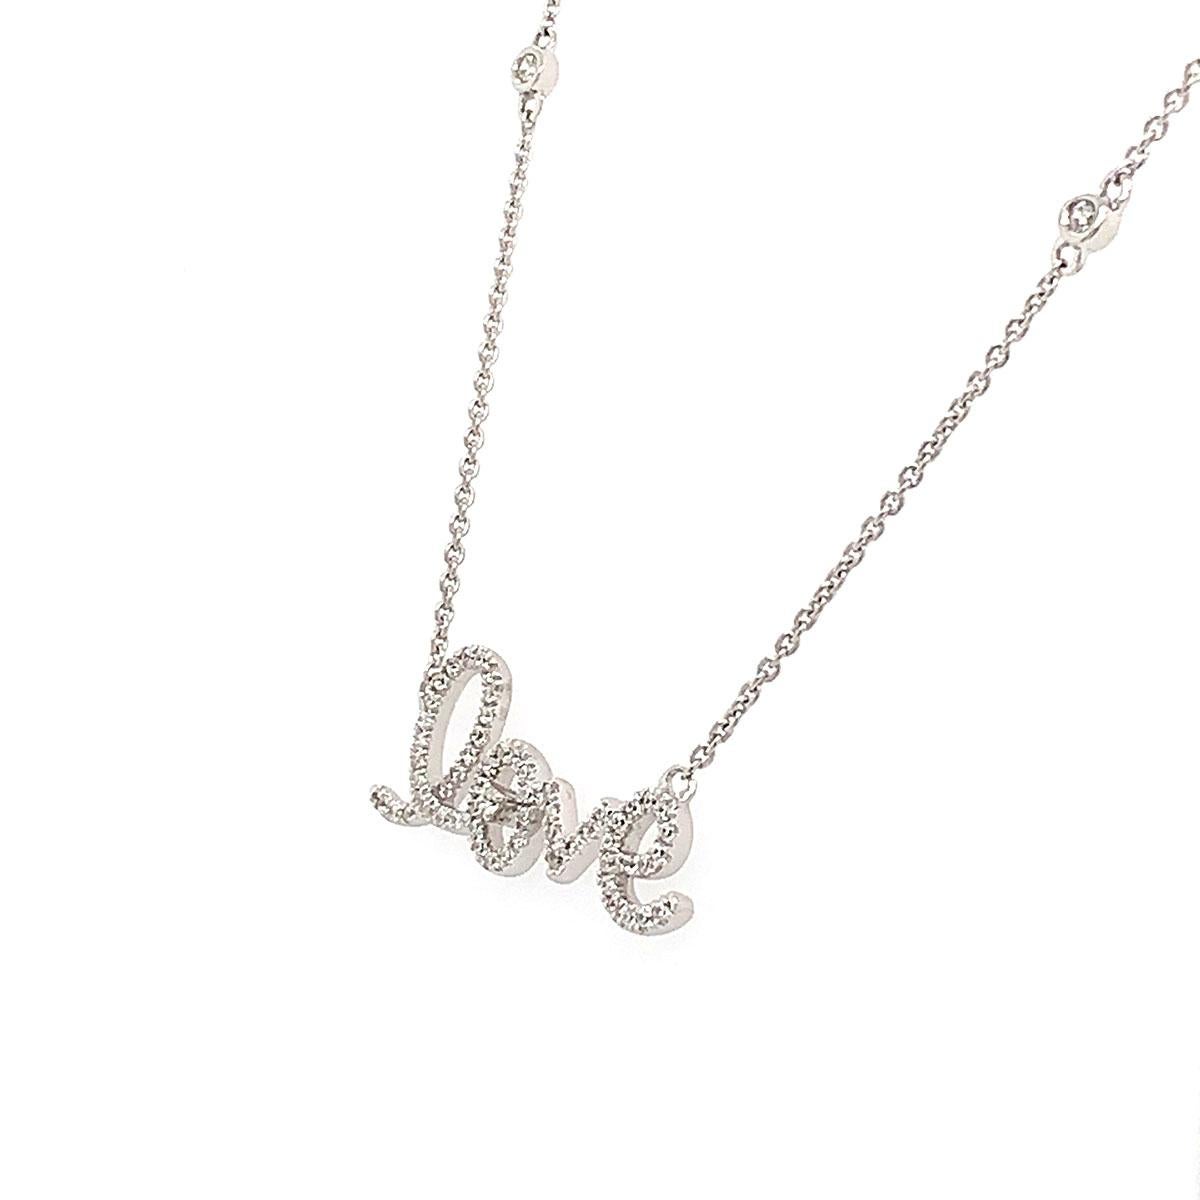 This elegant necklace features four(4) evenly spread brilliant diamonds bezel set on a delicate chain connecting to a Love diamond pendant Micro-Prong -Set. An ideal gift for birthday, valentine, or graduation. Experience the difference in